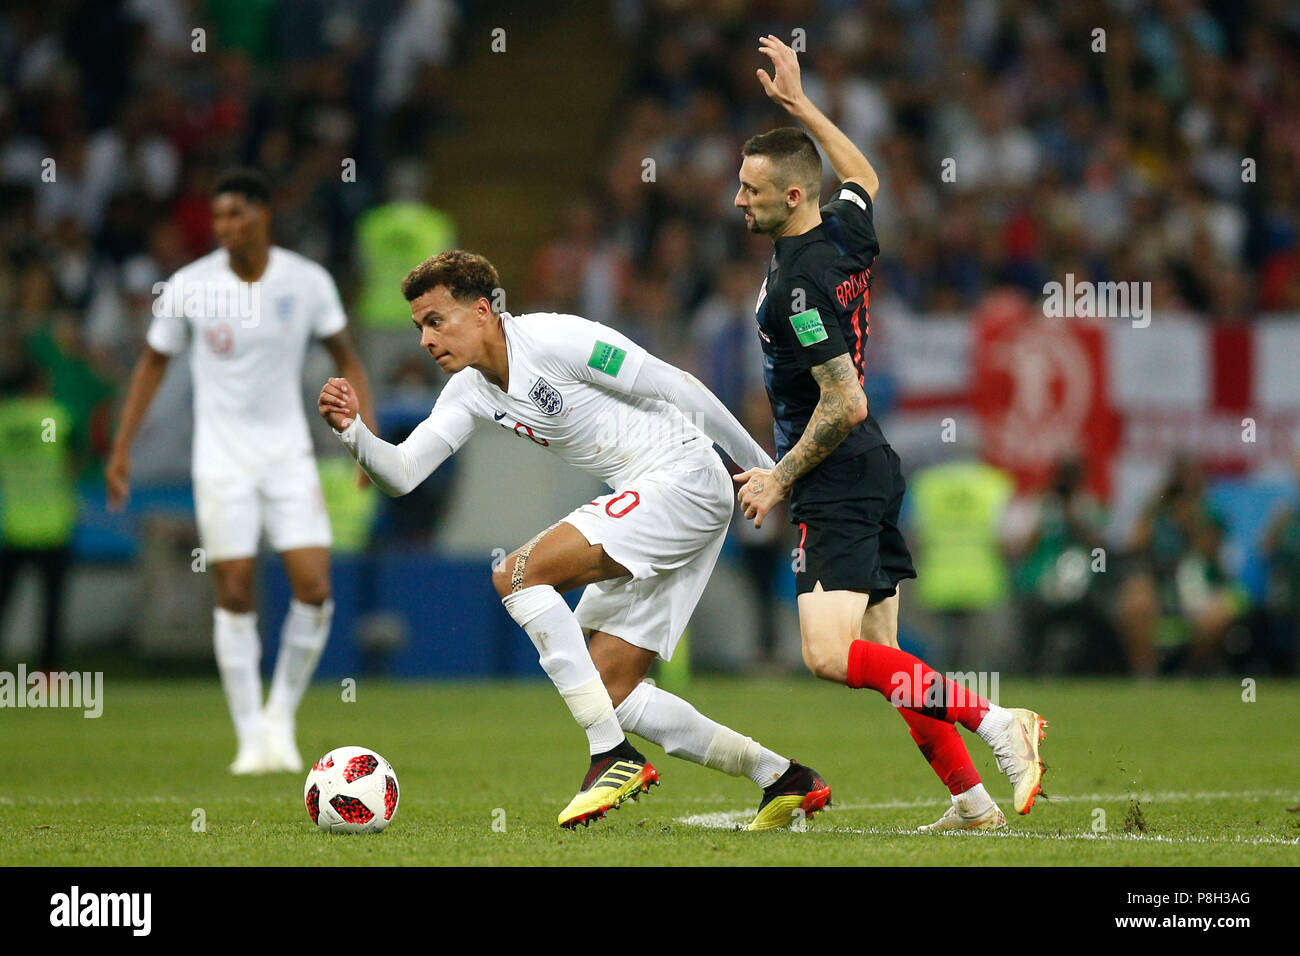 Moscow, Russia. 11th July 2018. Dele Alli of England under pressure from Marcelo Brozovic of Croatia during the 2018 FIFA World Cup Semi Final match between Croatia and England at Luzhniki Stadium on July 11th 2018 in Moscow, Russia. (Photo by Daniel Chesterton/phcimages.com) Credit: PHC Images/Alamy Live News Stock Photo